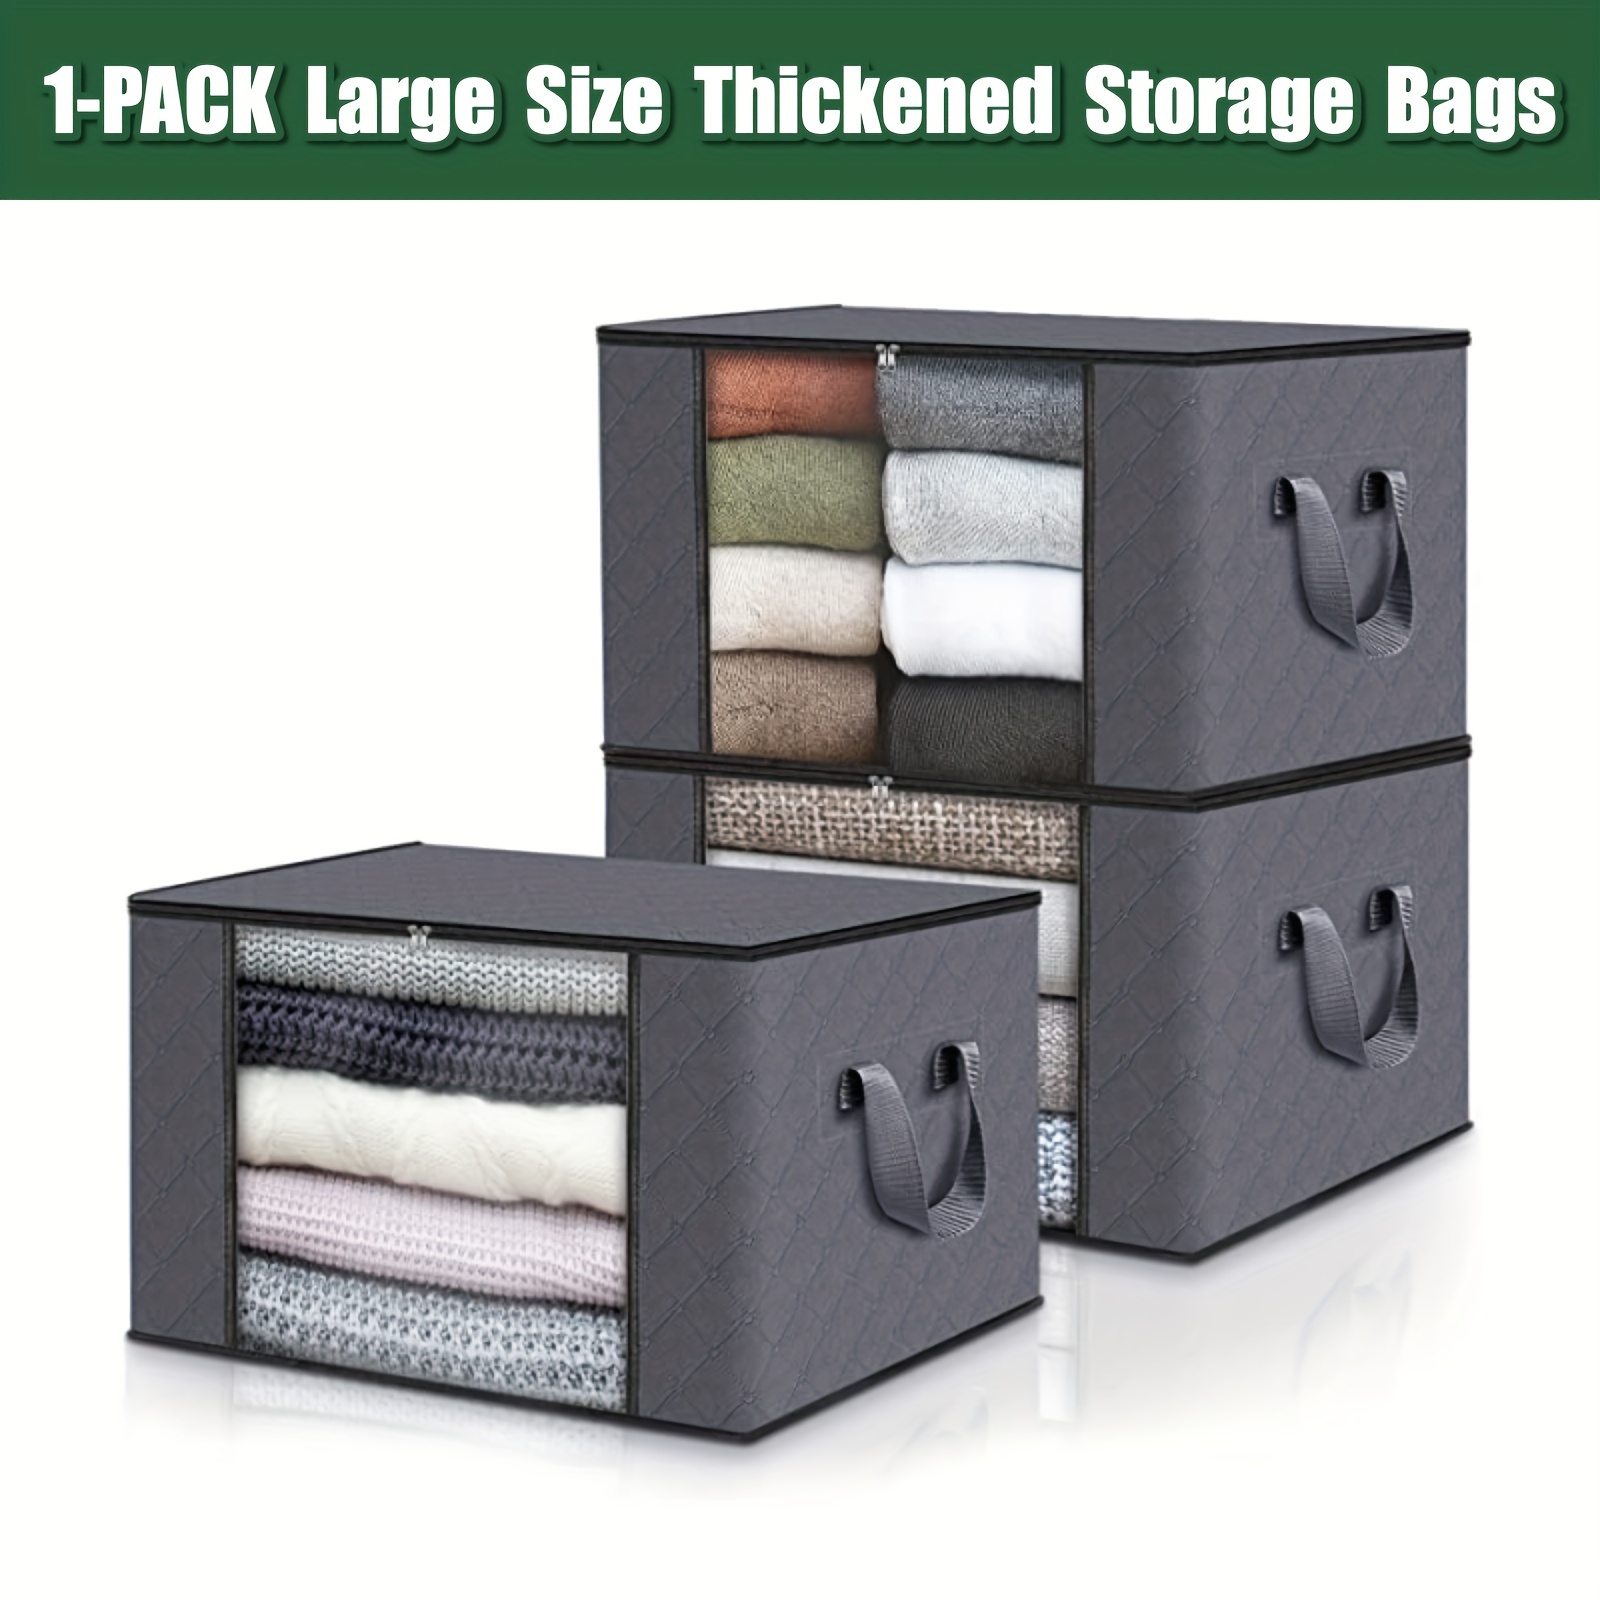 

1pc Storage Bags Large Capacity Clothes Storage Bins With Durable Handles Sturdy Zippers Thick Fabric For Clothing, Comforter, Blanket Storage Collapsible Closet Containers, 60l